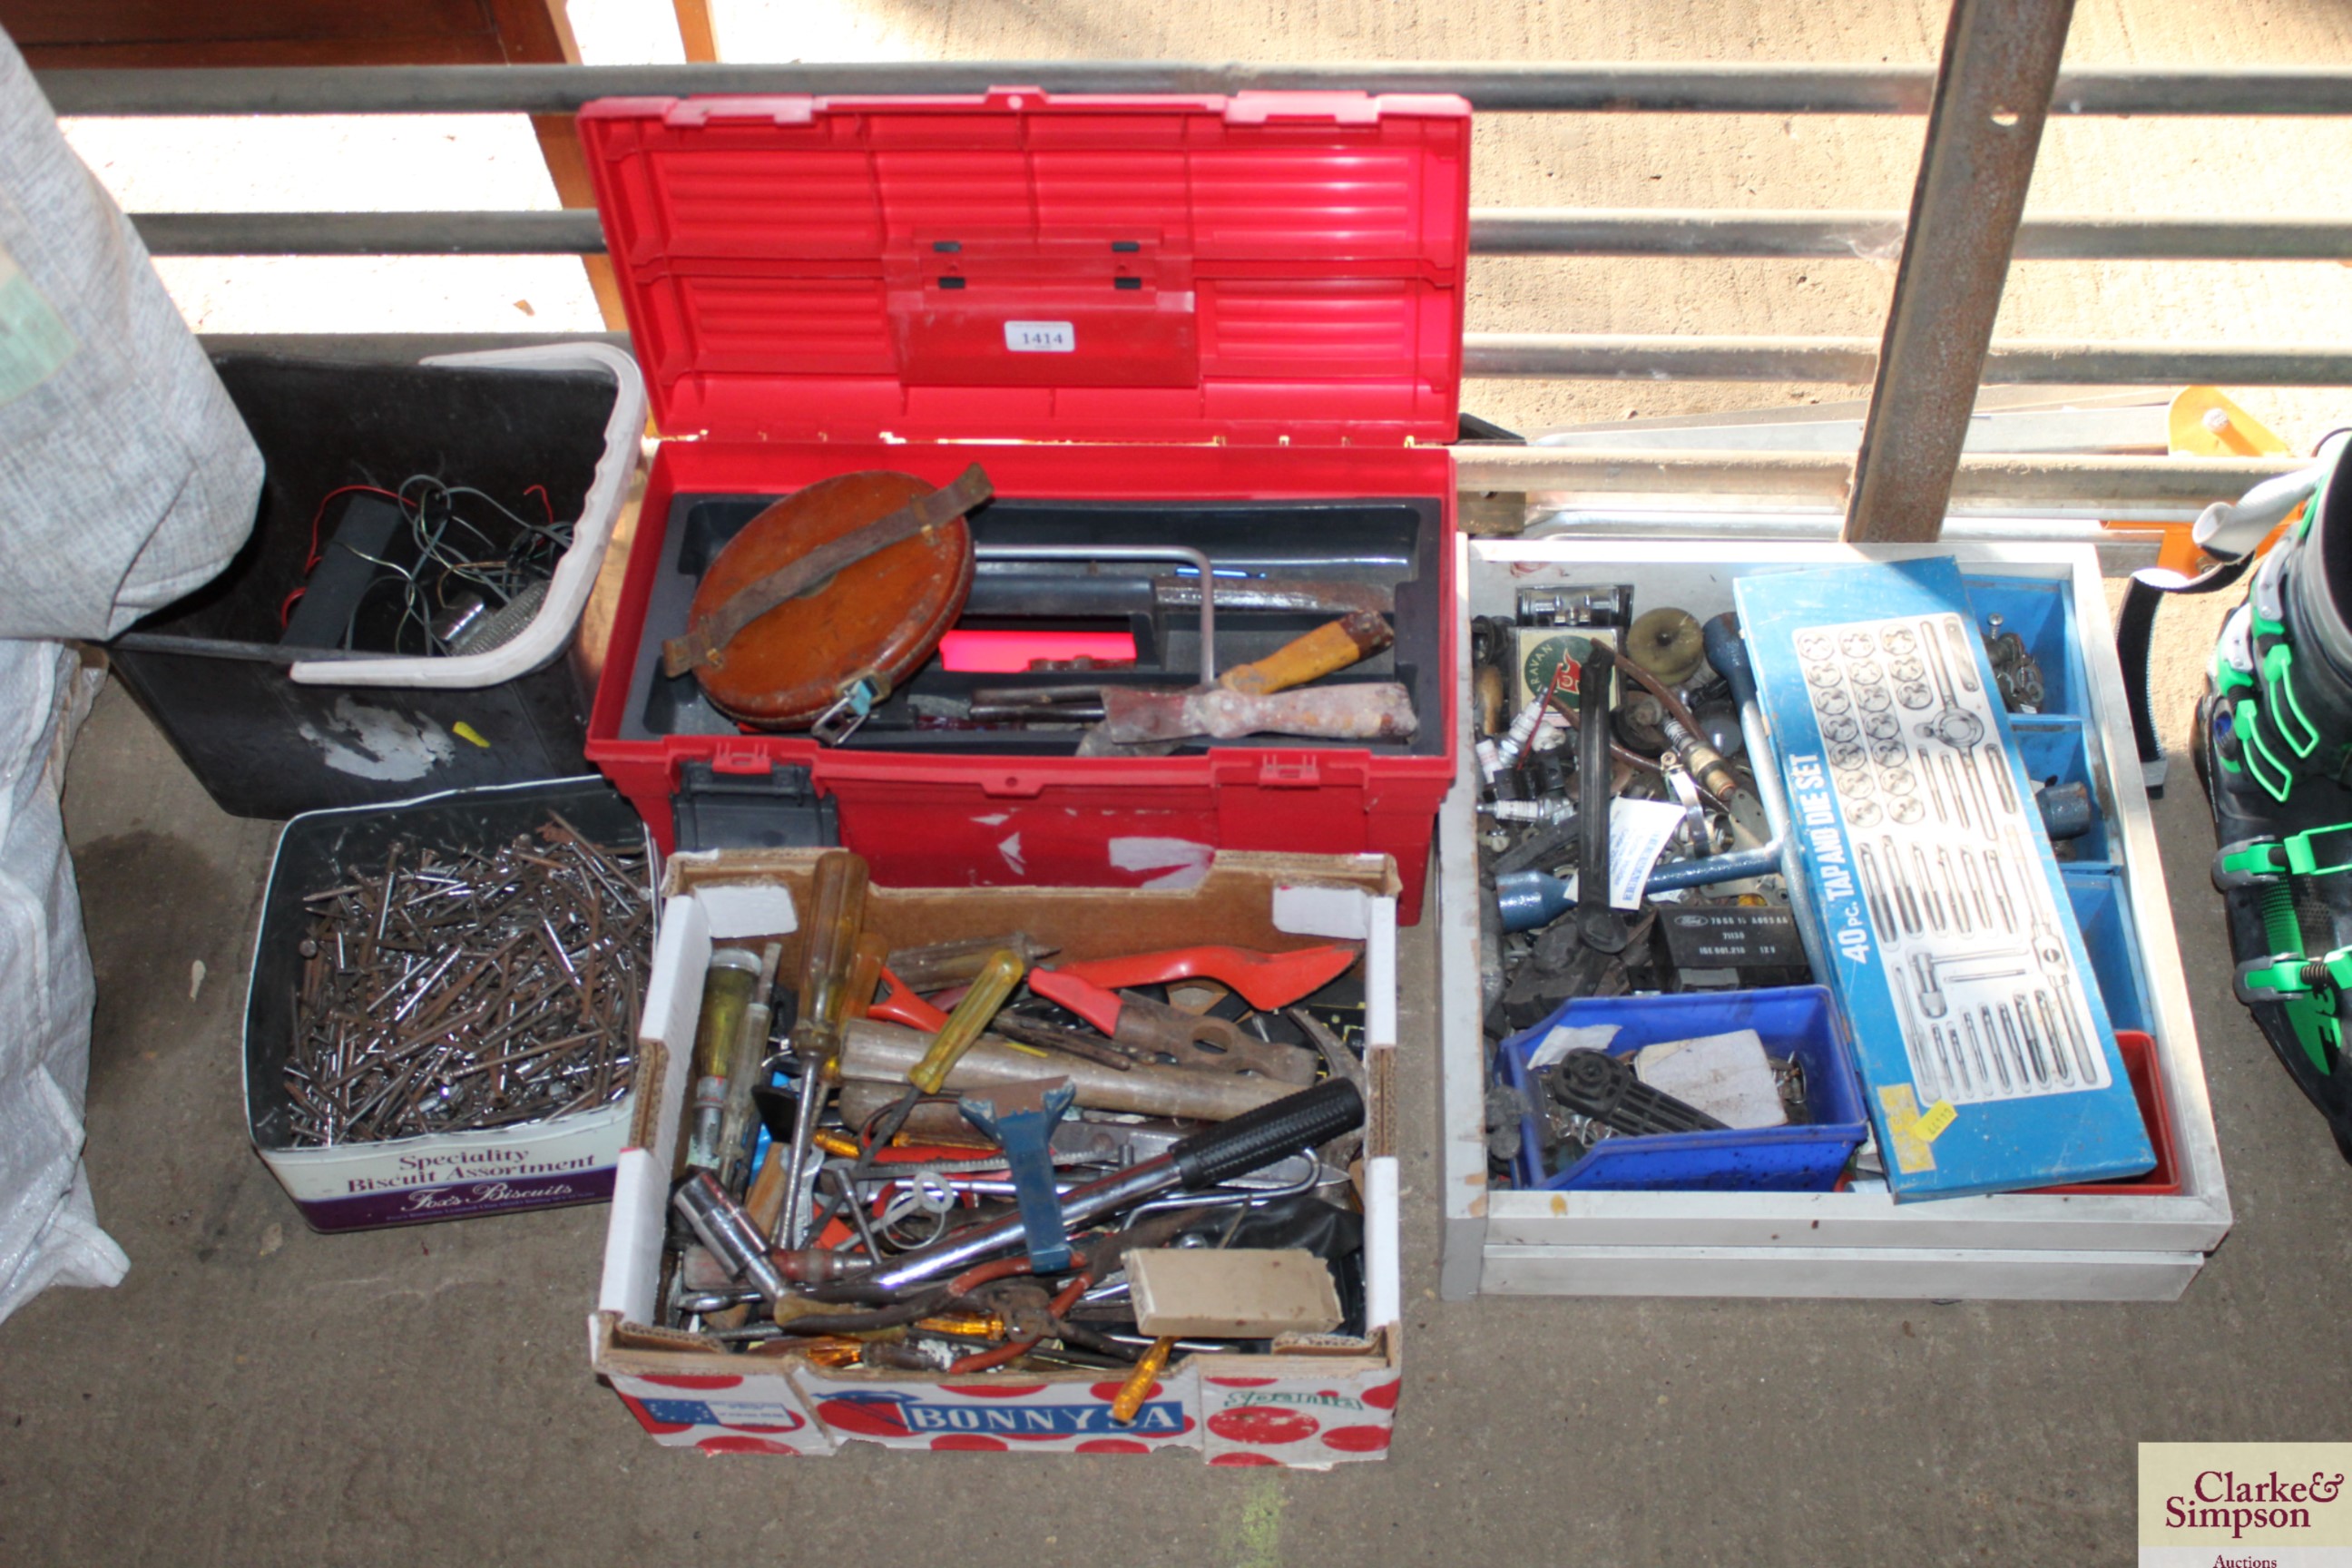 A large quantity of tools and nails